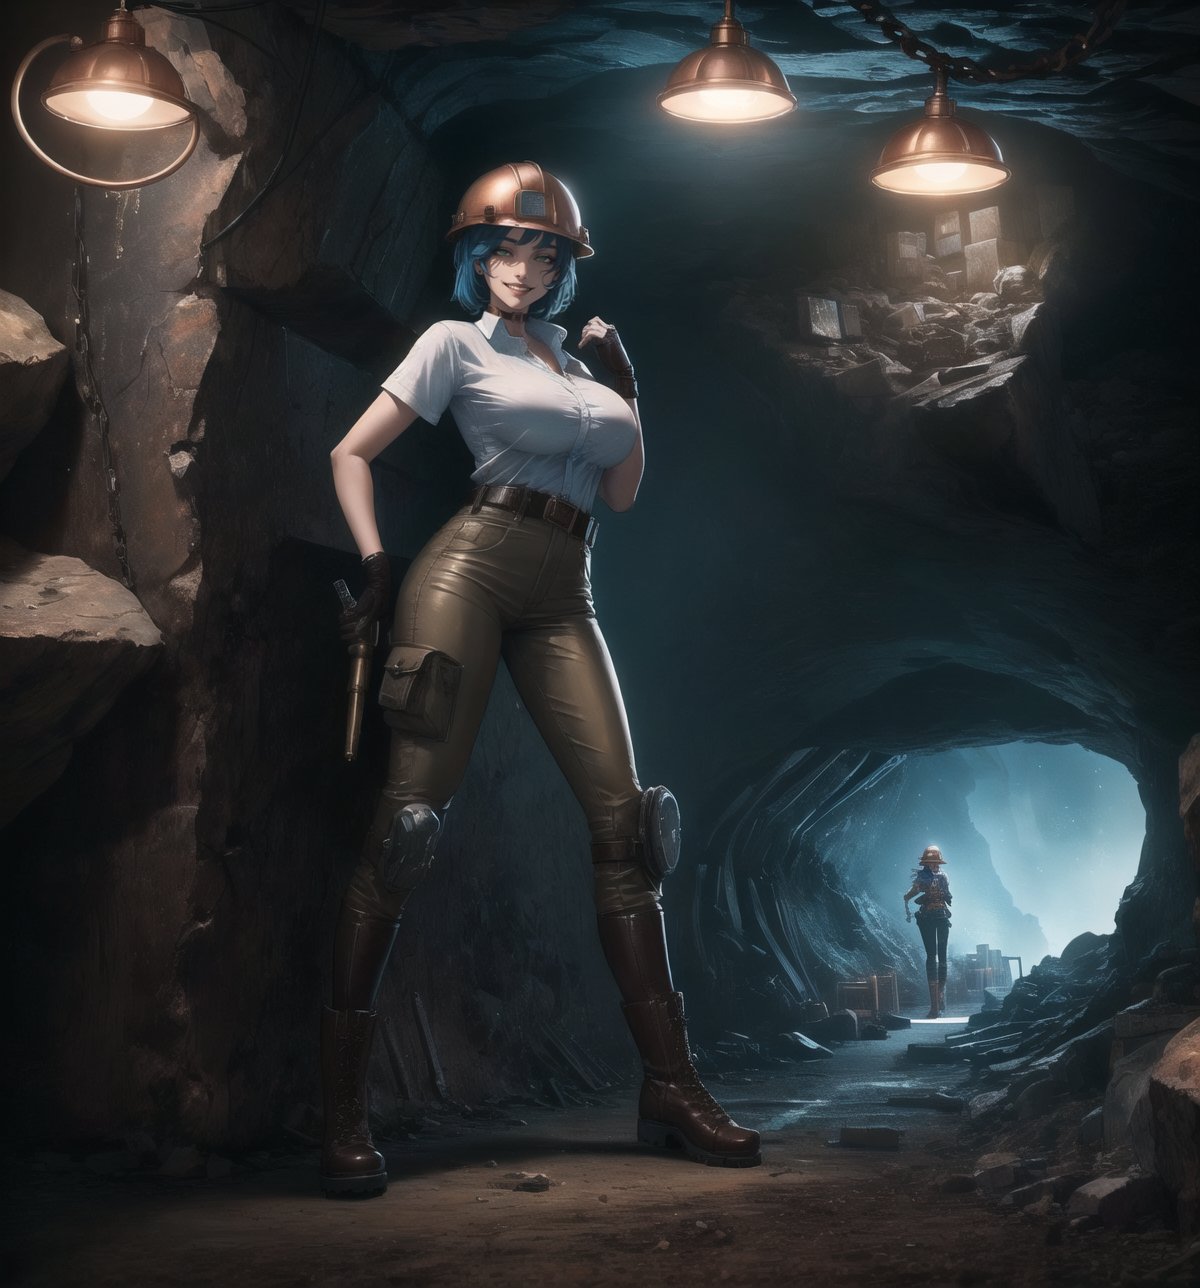 A masterpiece in 4K ultra-detailed realistic and futuristic style. | Ayla, a 26-year-old woman with short, messy blue hair, wears a brown mining suit with copper and black accents. The suit consists of a short-sleeved shirt, long pants, and high-top boots. She also wears a protective helmet with a lamp on the front, brown leather gloves, a belt with various tools, and a copper pocket watch. Her green eyes are looking at the viewer, ((smiling)) showing her white teeth and lips painted in dark brown. The scene takes place in a mining cave, with rocky structures and wooden and metal frameworks, mining machinery and equipment, and lamps attached to the walls. | The image highlights Ayla's imposing figure amidst the mining cave. The rocky, wooden, and metal structures, along with Ayla, the mining equipment, the tools on her belt, and the lamps on the walls, create a futuristic and industrial atmosphere. The lamps and the light from the helmet's lamp create dramatic shadows and highlight the details of the scene. | Soft and dark lighting effects create a relaxing and mysterious atmosphere, while rough and detailed textures on the structures and the suit add realism to the image. | A relaxing and terrifying scene of Ayla, a woman miner, in a futuristic mining cave. | ((((The image reveals a full-body_shot as she assumes a sensual_pose, engagingly leaning against a structure within the scene in an exciting manner))))). | (((((She takes on a sensual_pose as she interacts, boldly leaning on a structure, leaning back in an exciting way))))). | ((perfect_body)), ((perfect_pose)), ((full-body_shot)), ((perfect_fingers, better_hands, perfect_hands)), ((perfect_legs, perfect_feet)), ((huge_breasts, big_natural_breasts, sagging_breasts)), ((perfect_design)), ((perfect_composition)), ((very detailed scene, very detailed background, perfect_layout, correct_imperfections)), ((More Detail, Enhance))